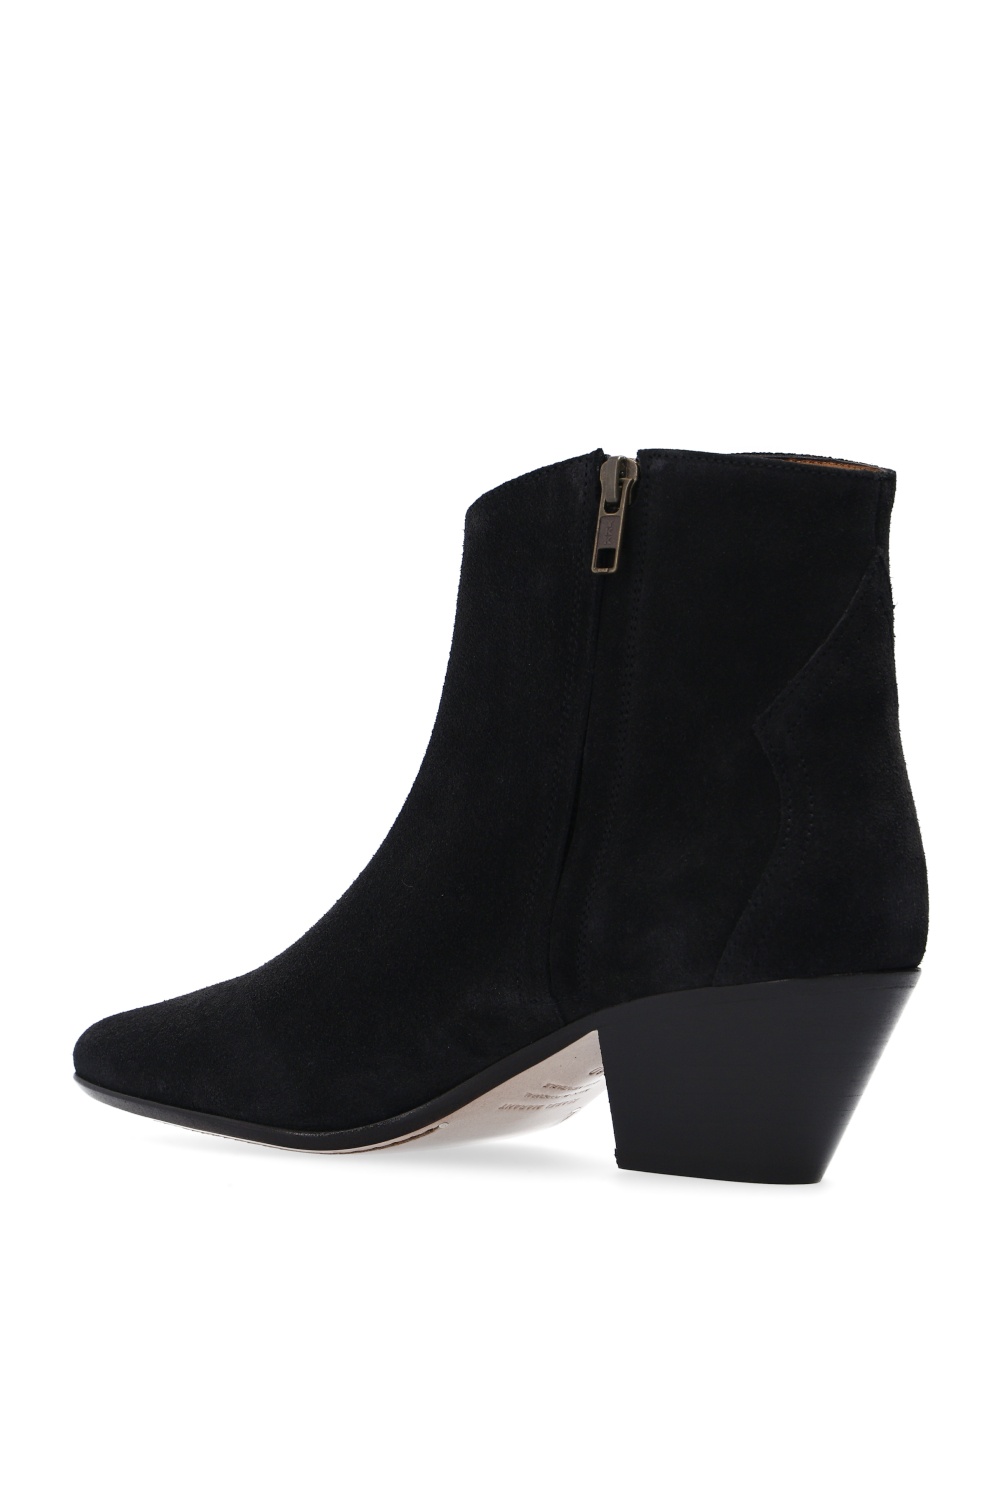 Isabel Marant ‘Dacken’ suede ankle boots